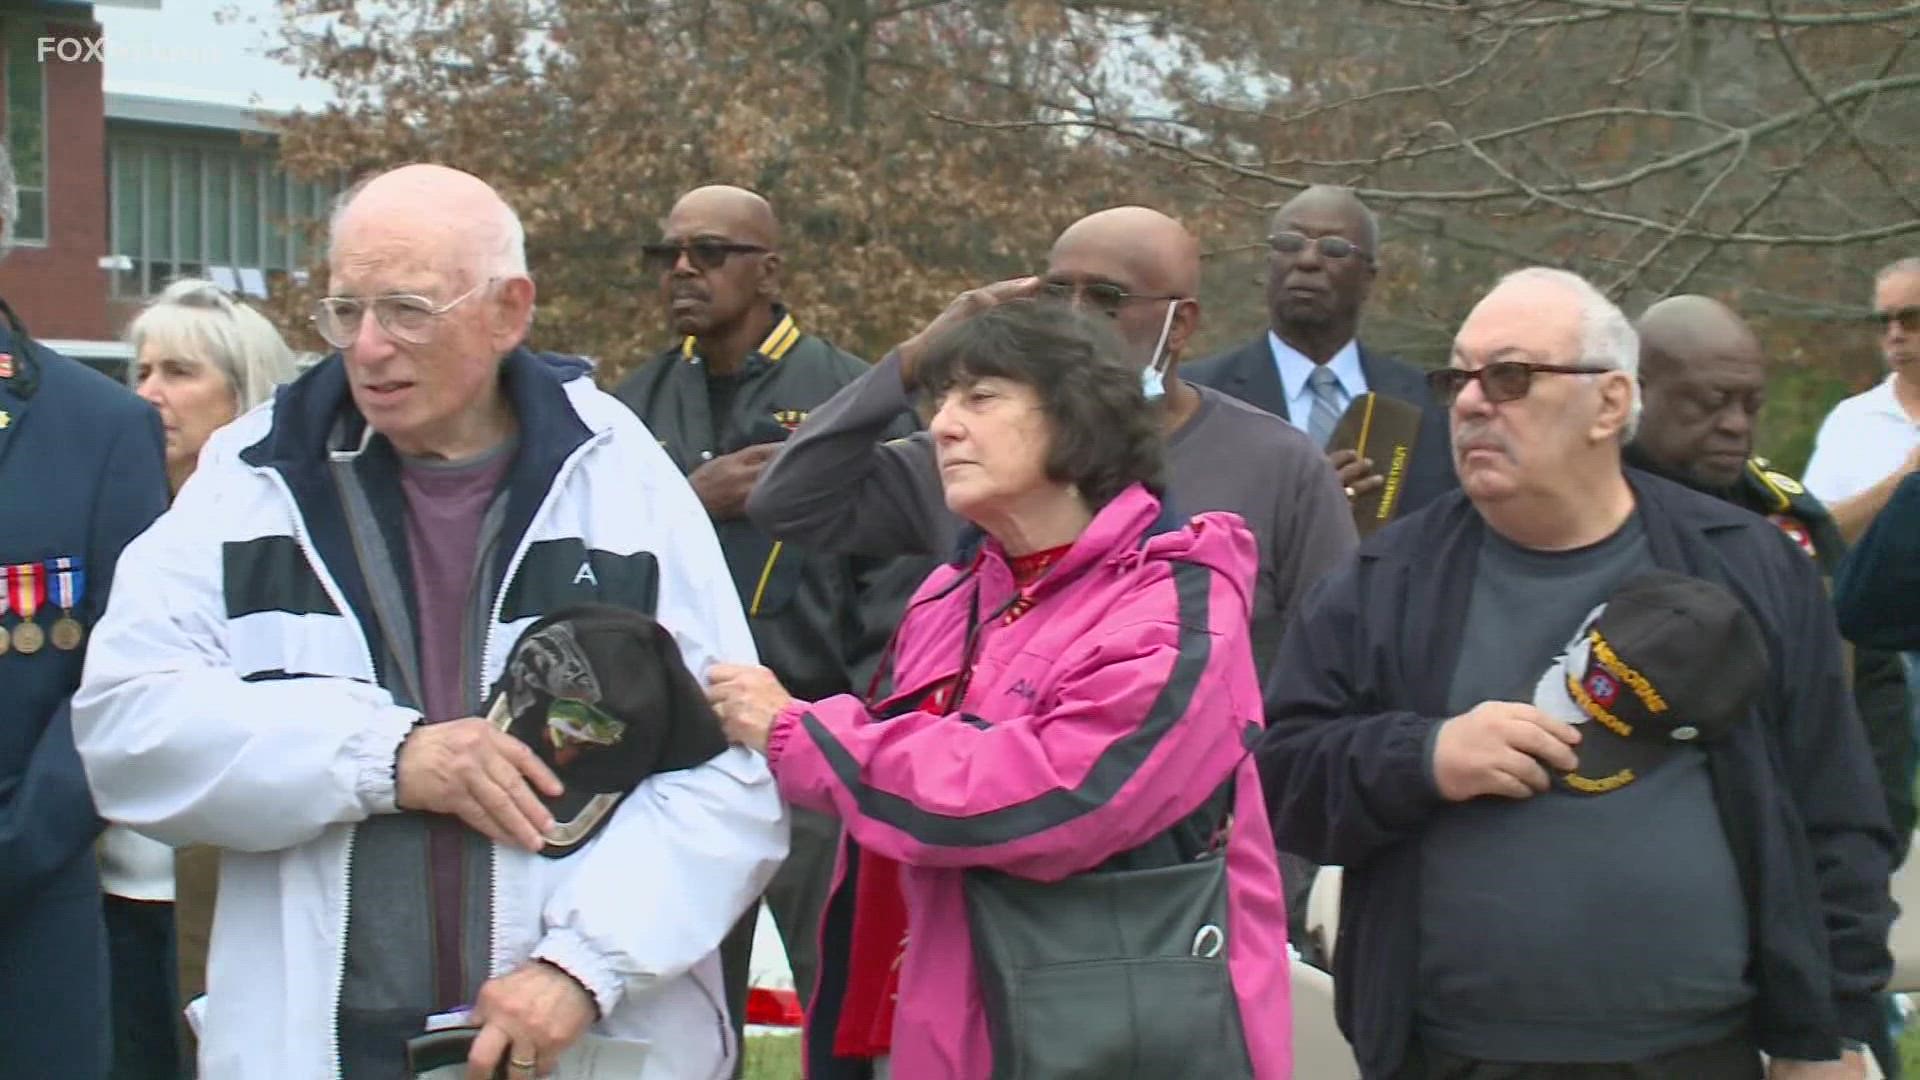 On Friday, veterans were honored with a ceremony.